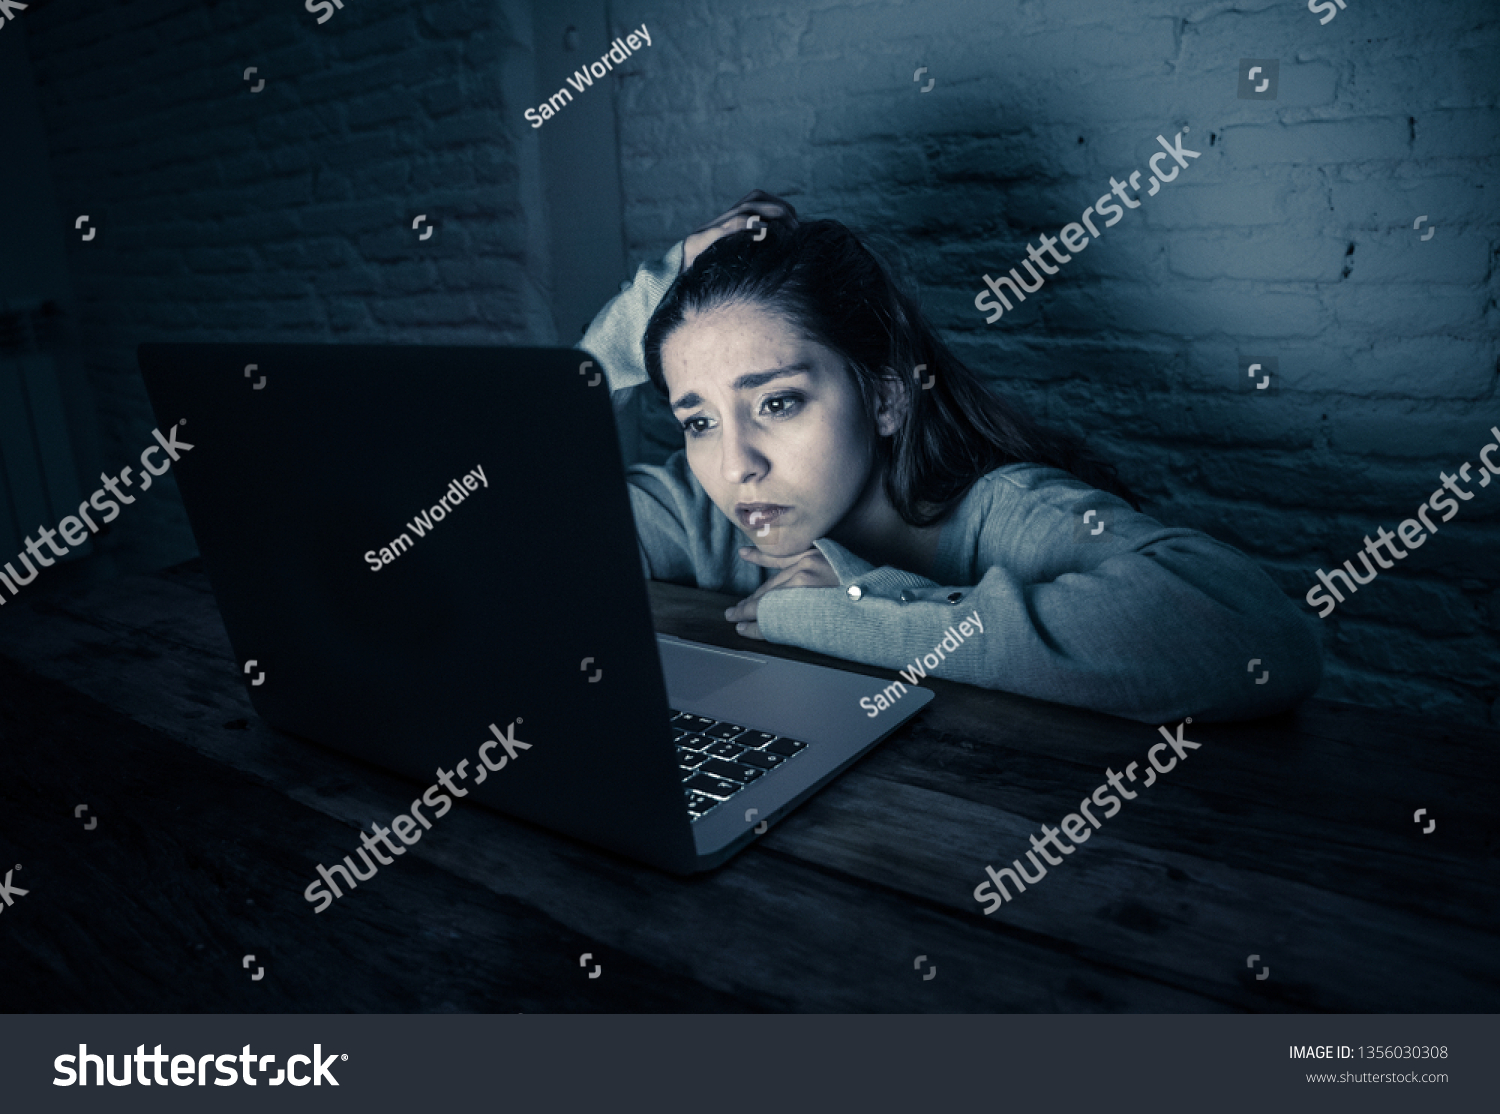 Dramatic portrait of sad scared young woman stressed and worried staring at laptop suffering cyber bullying and harassment. Victim of online abuse and intimidation by stalker. In dangers of internet. #1356030308